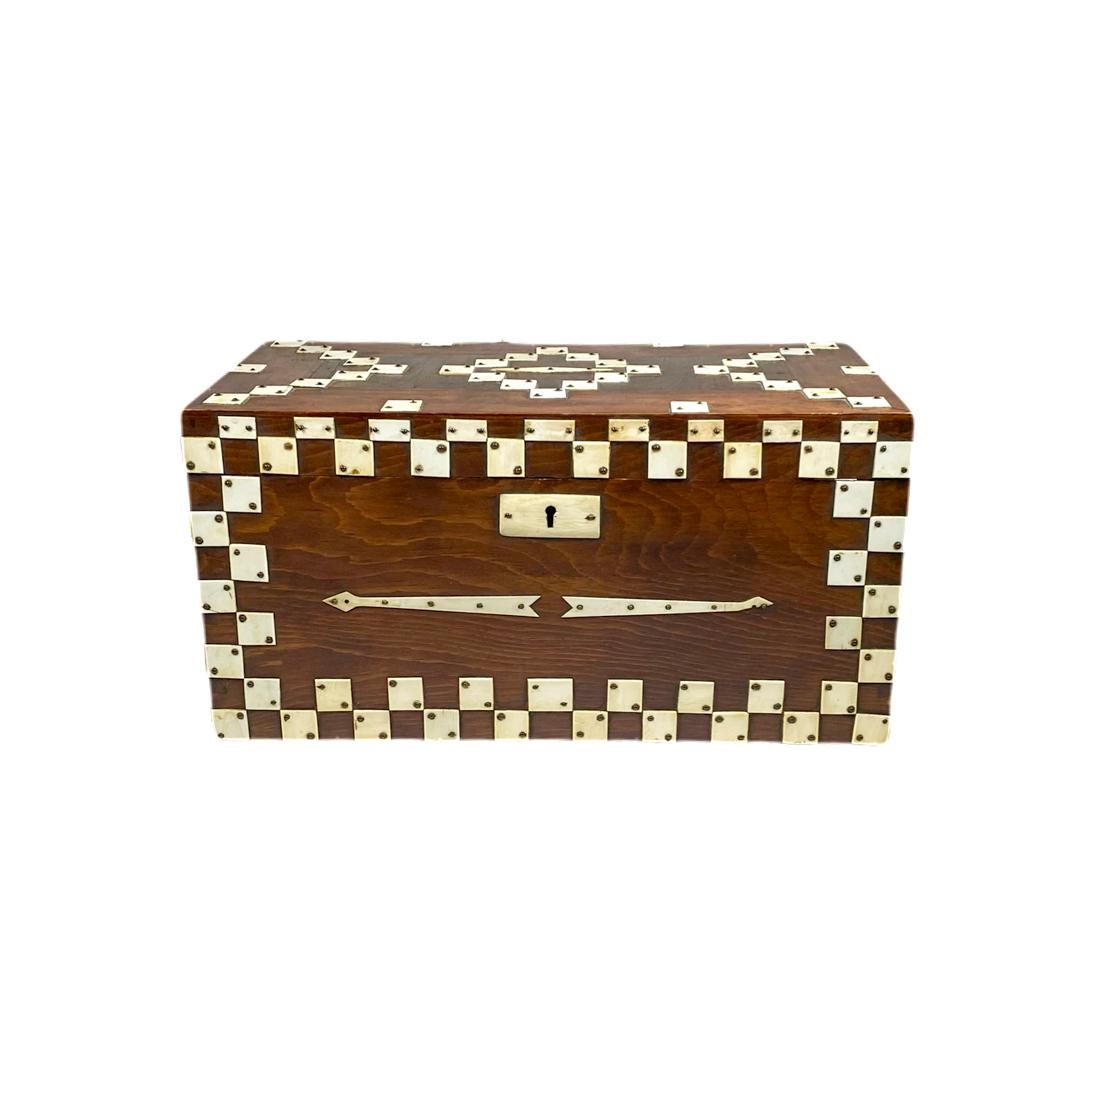 Stained pine with hinged top, decorated with geometric design out of recycled piano keys. The interior with a removable organizing drawer. Illegible names with numbers are faintly written in pencil on the inside lid, American, circa 1920-1940.